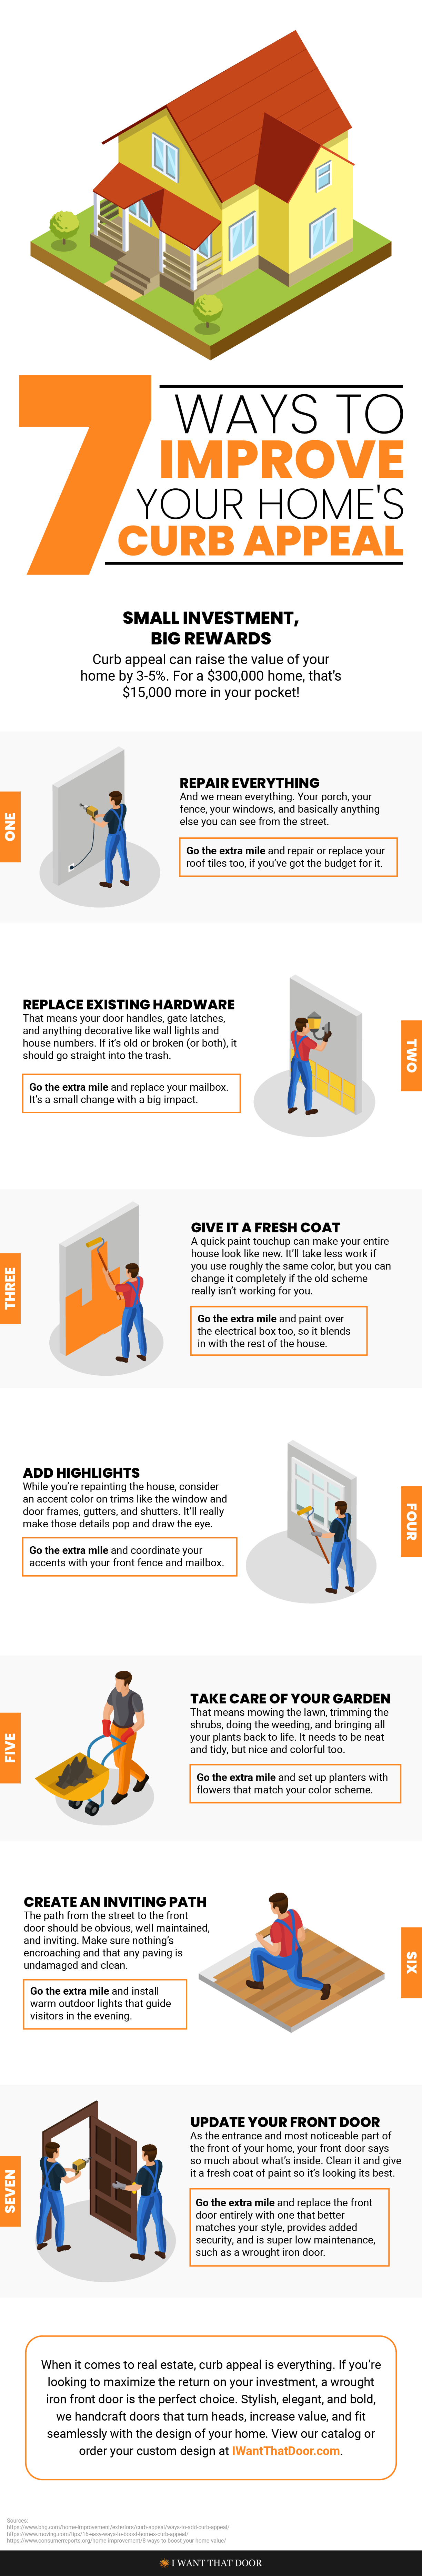 7 Ways to Improve Your Home's Curb Appeal Infographic